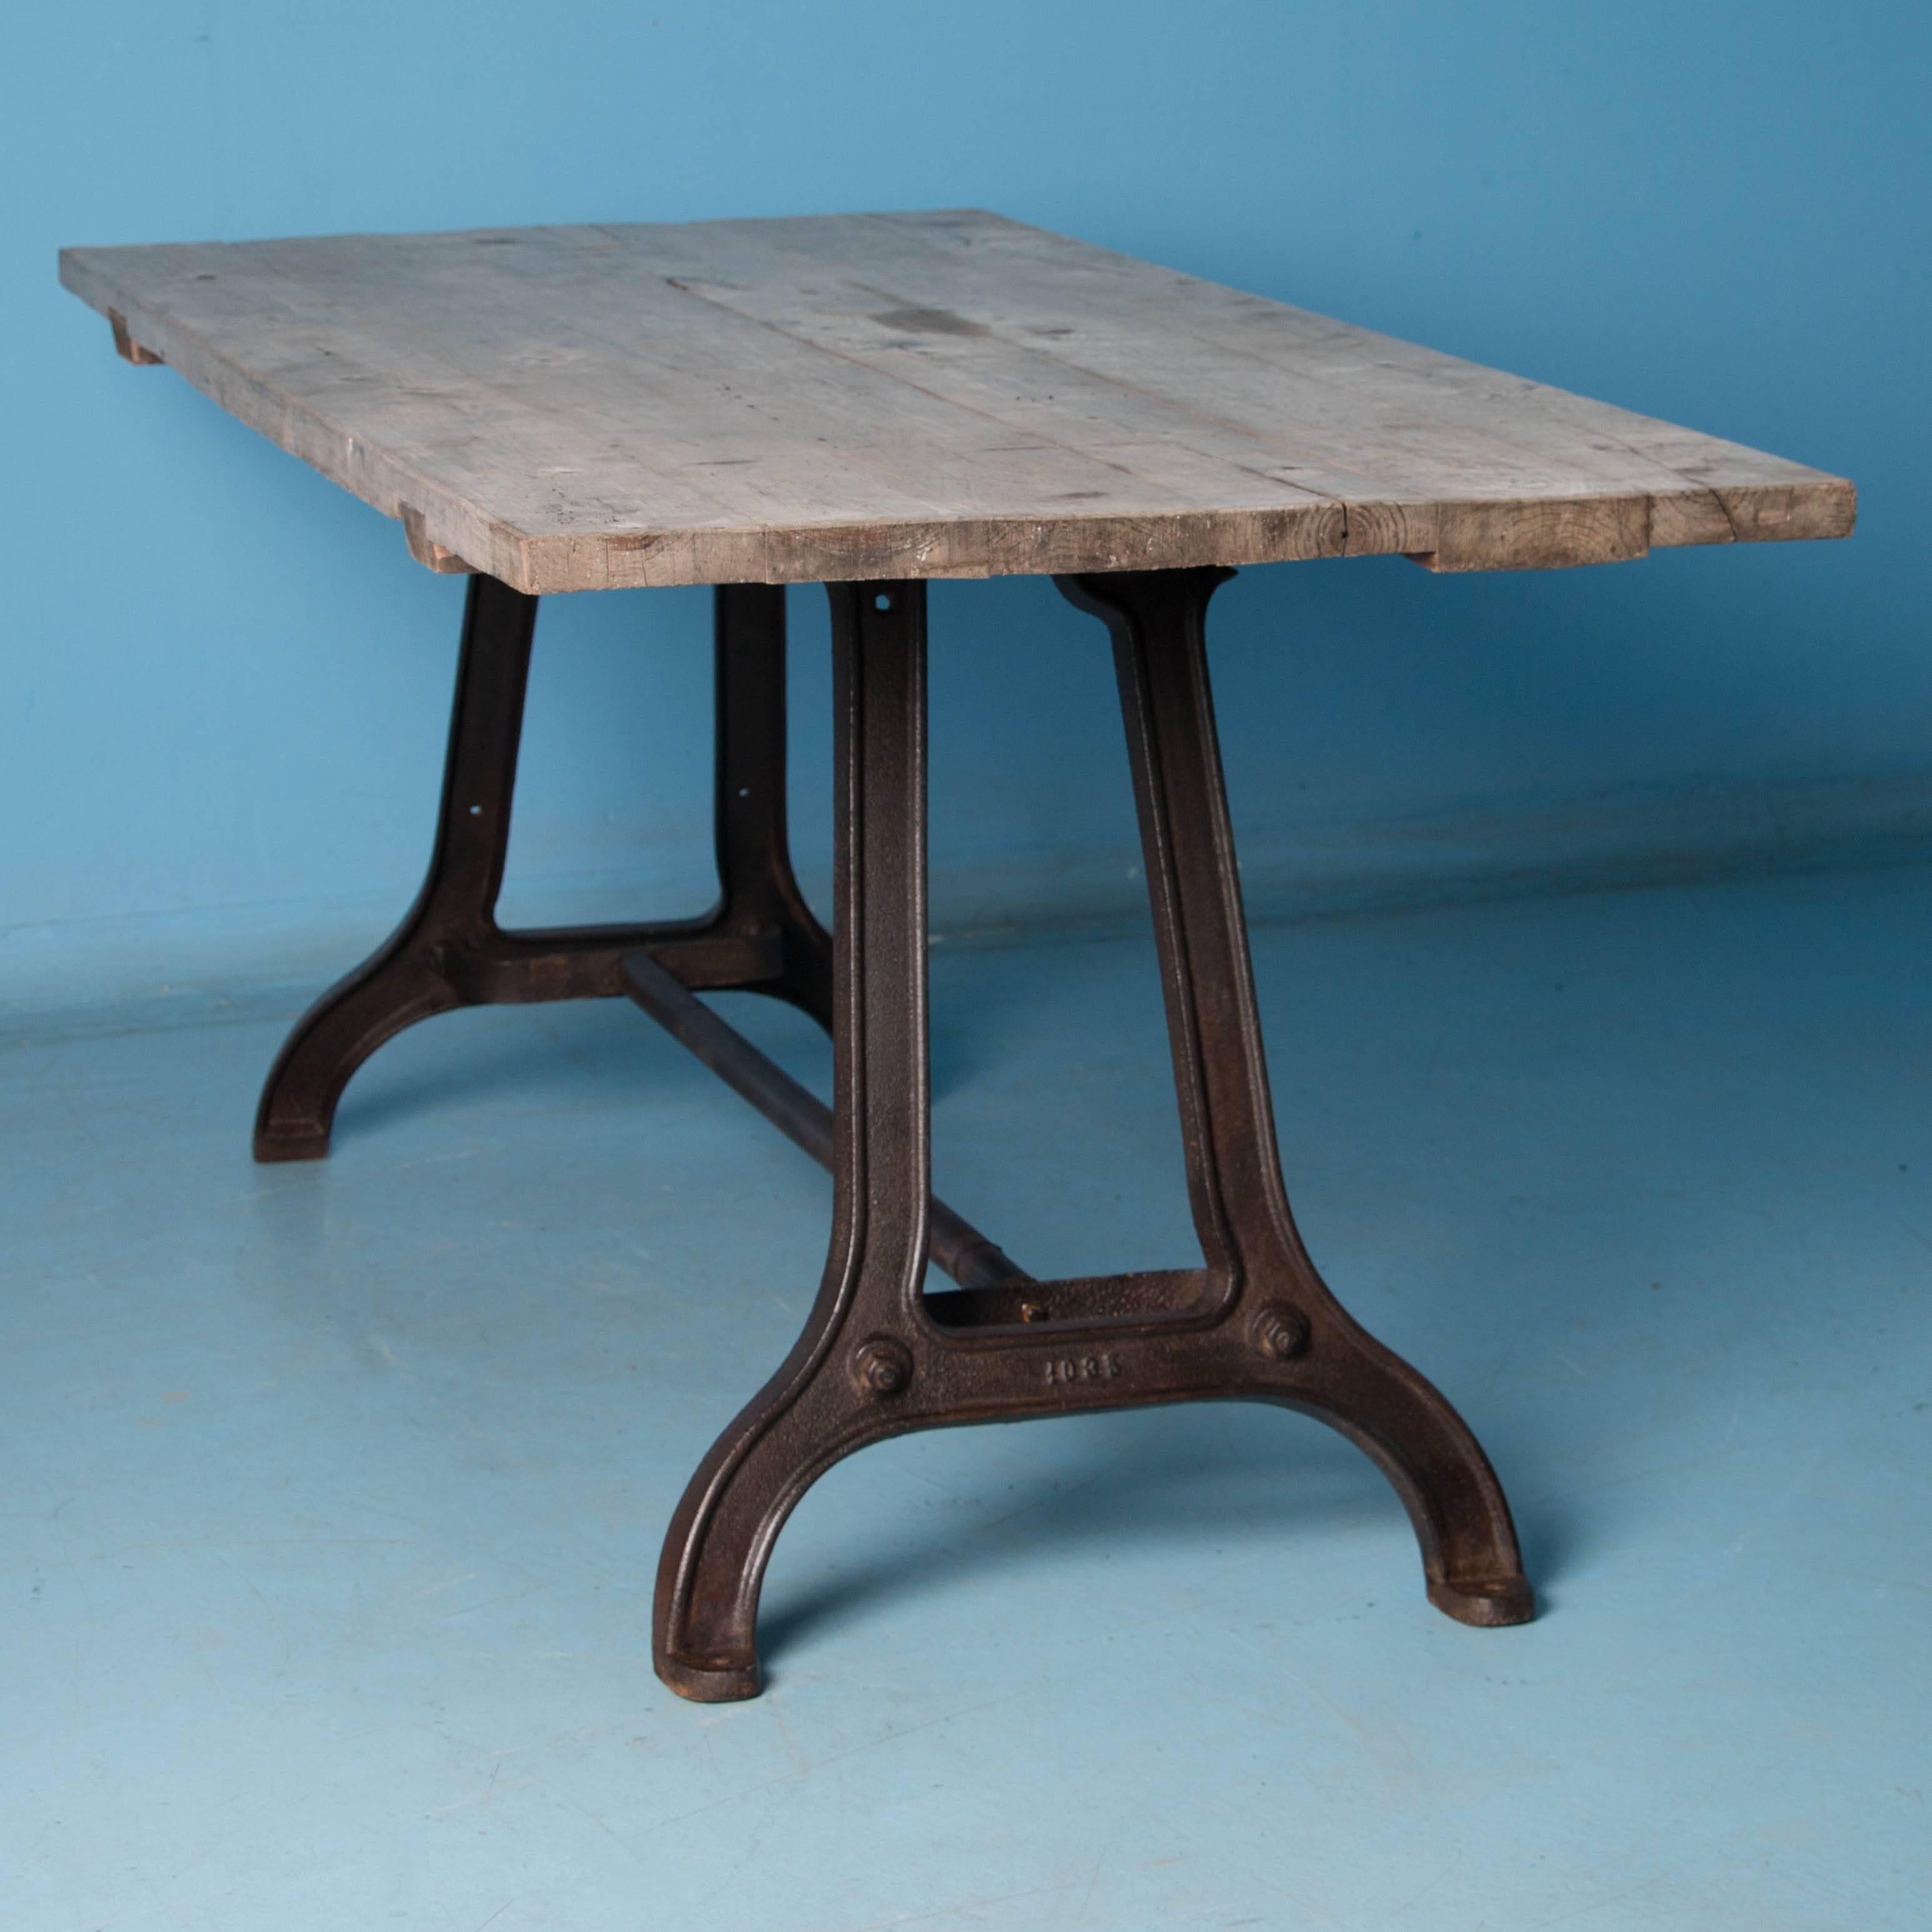 Hungarian Antique Dining Table with Industrial Iron Base